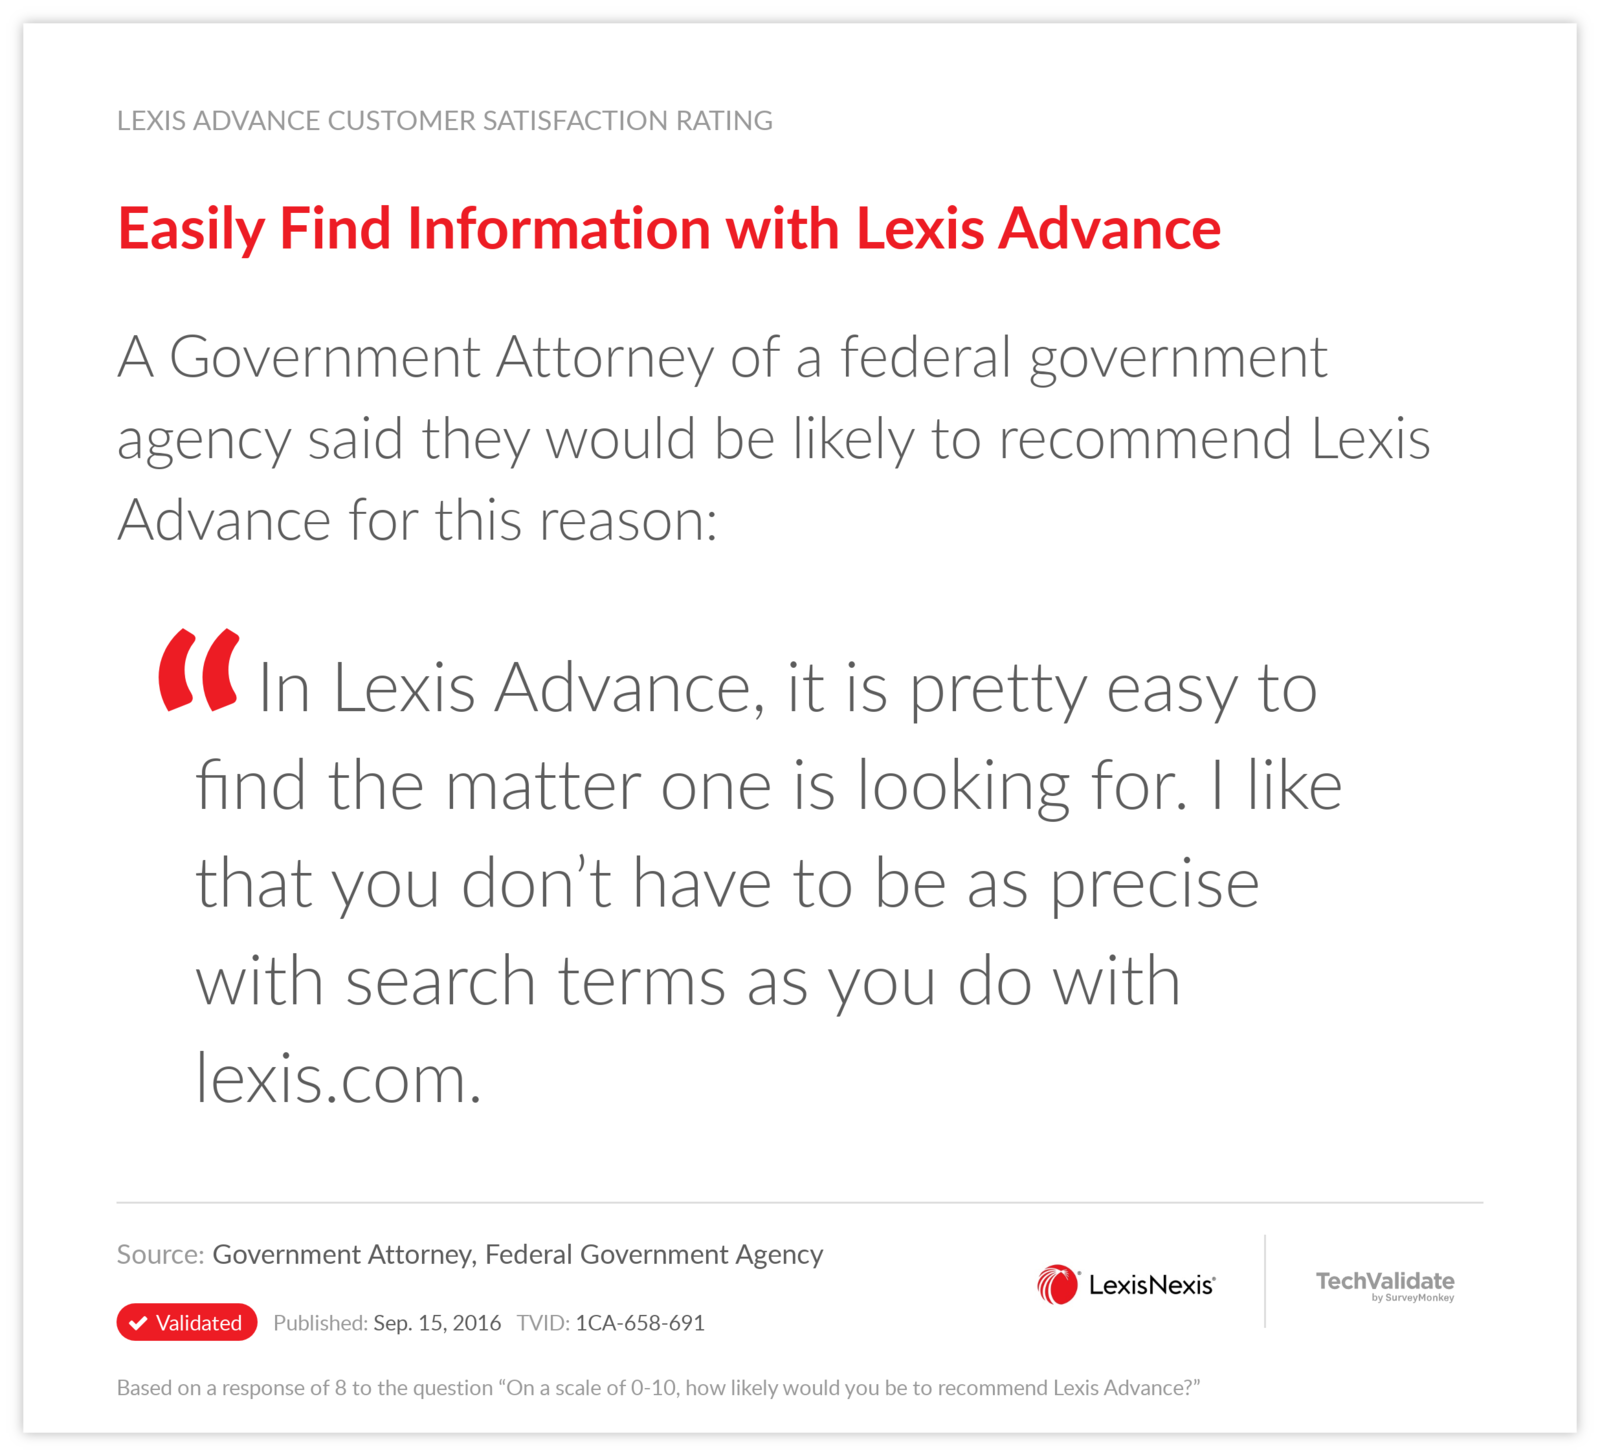 Easily Find Information with Lexis Advance